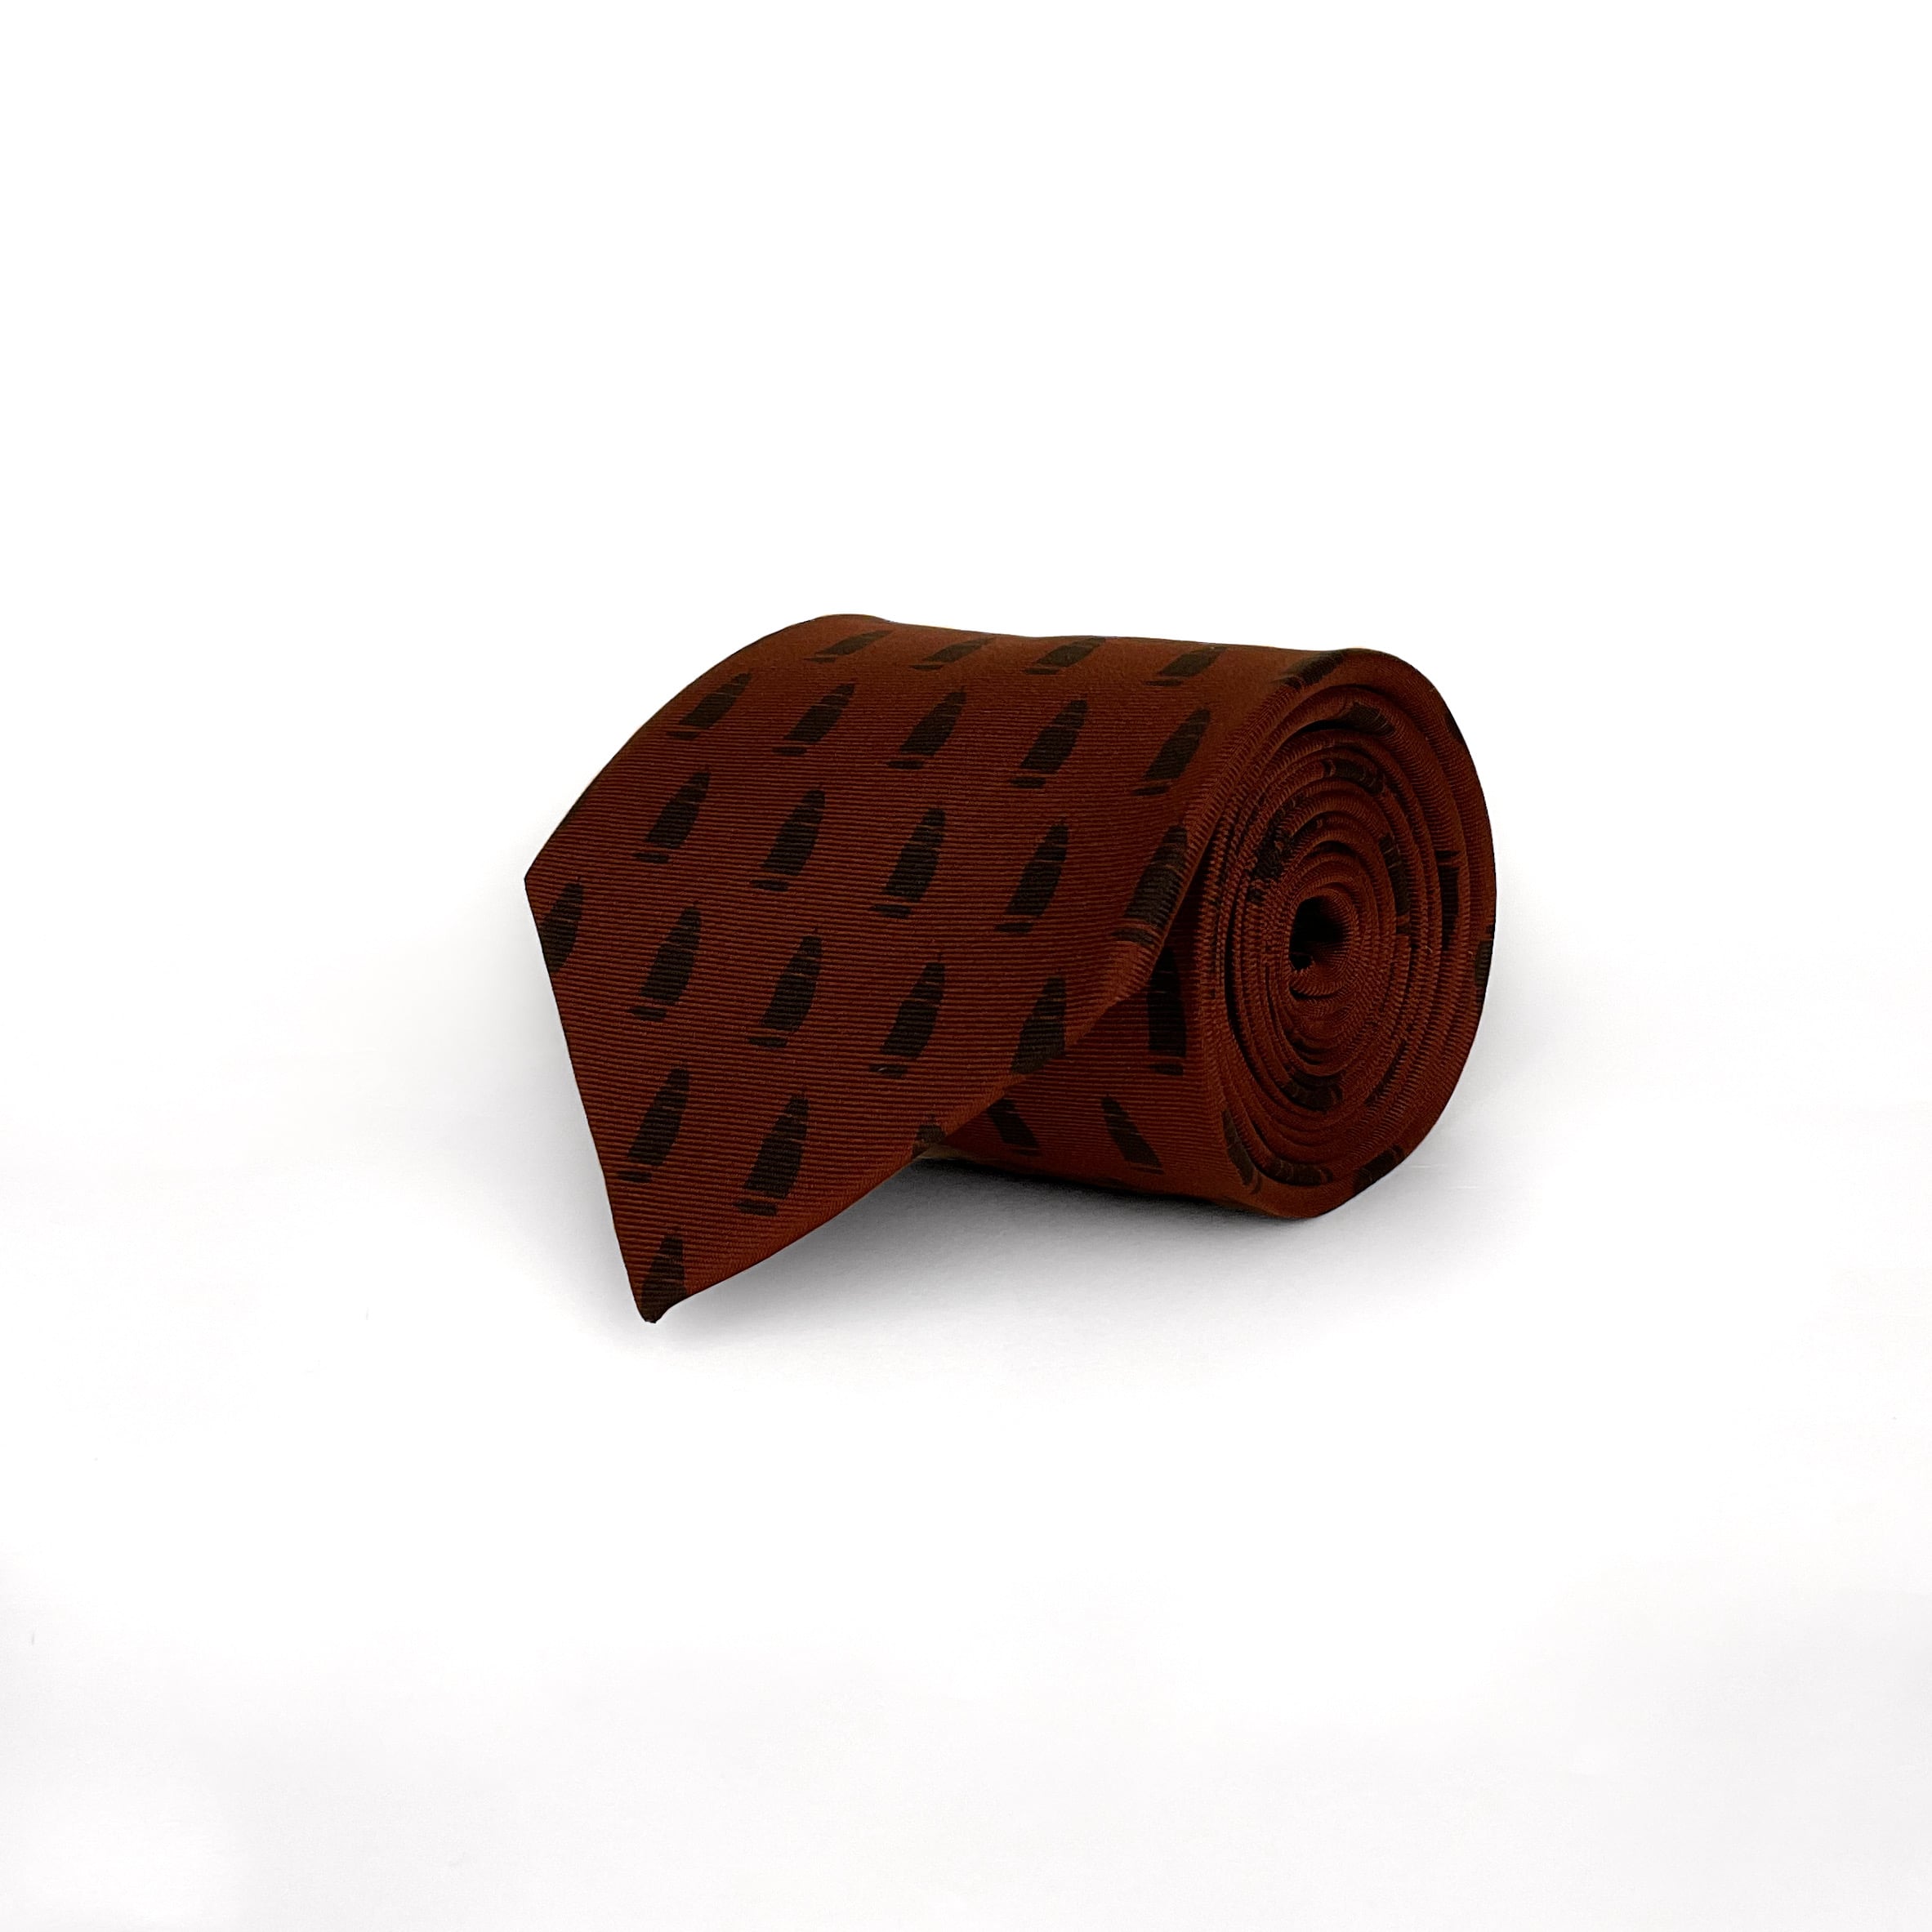 Burgundy red silk tie with a printed pattern of ships.  The tie is rolled and placed on a white background